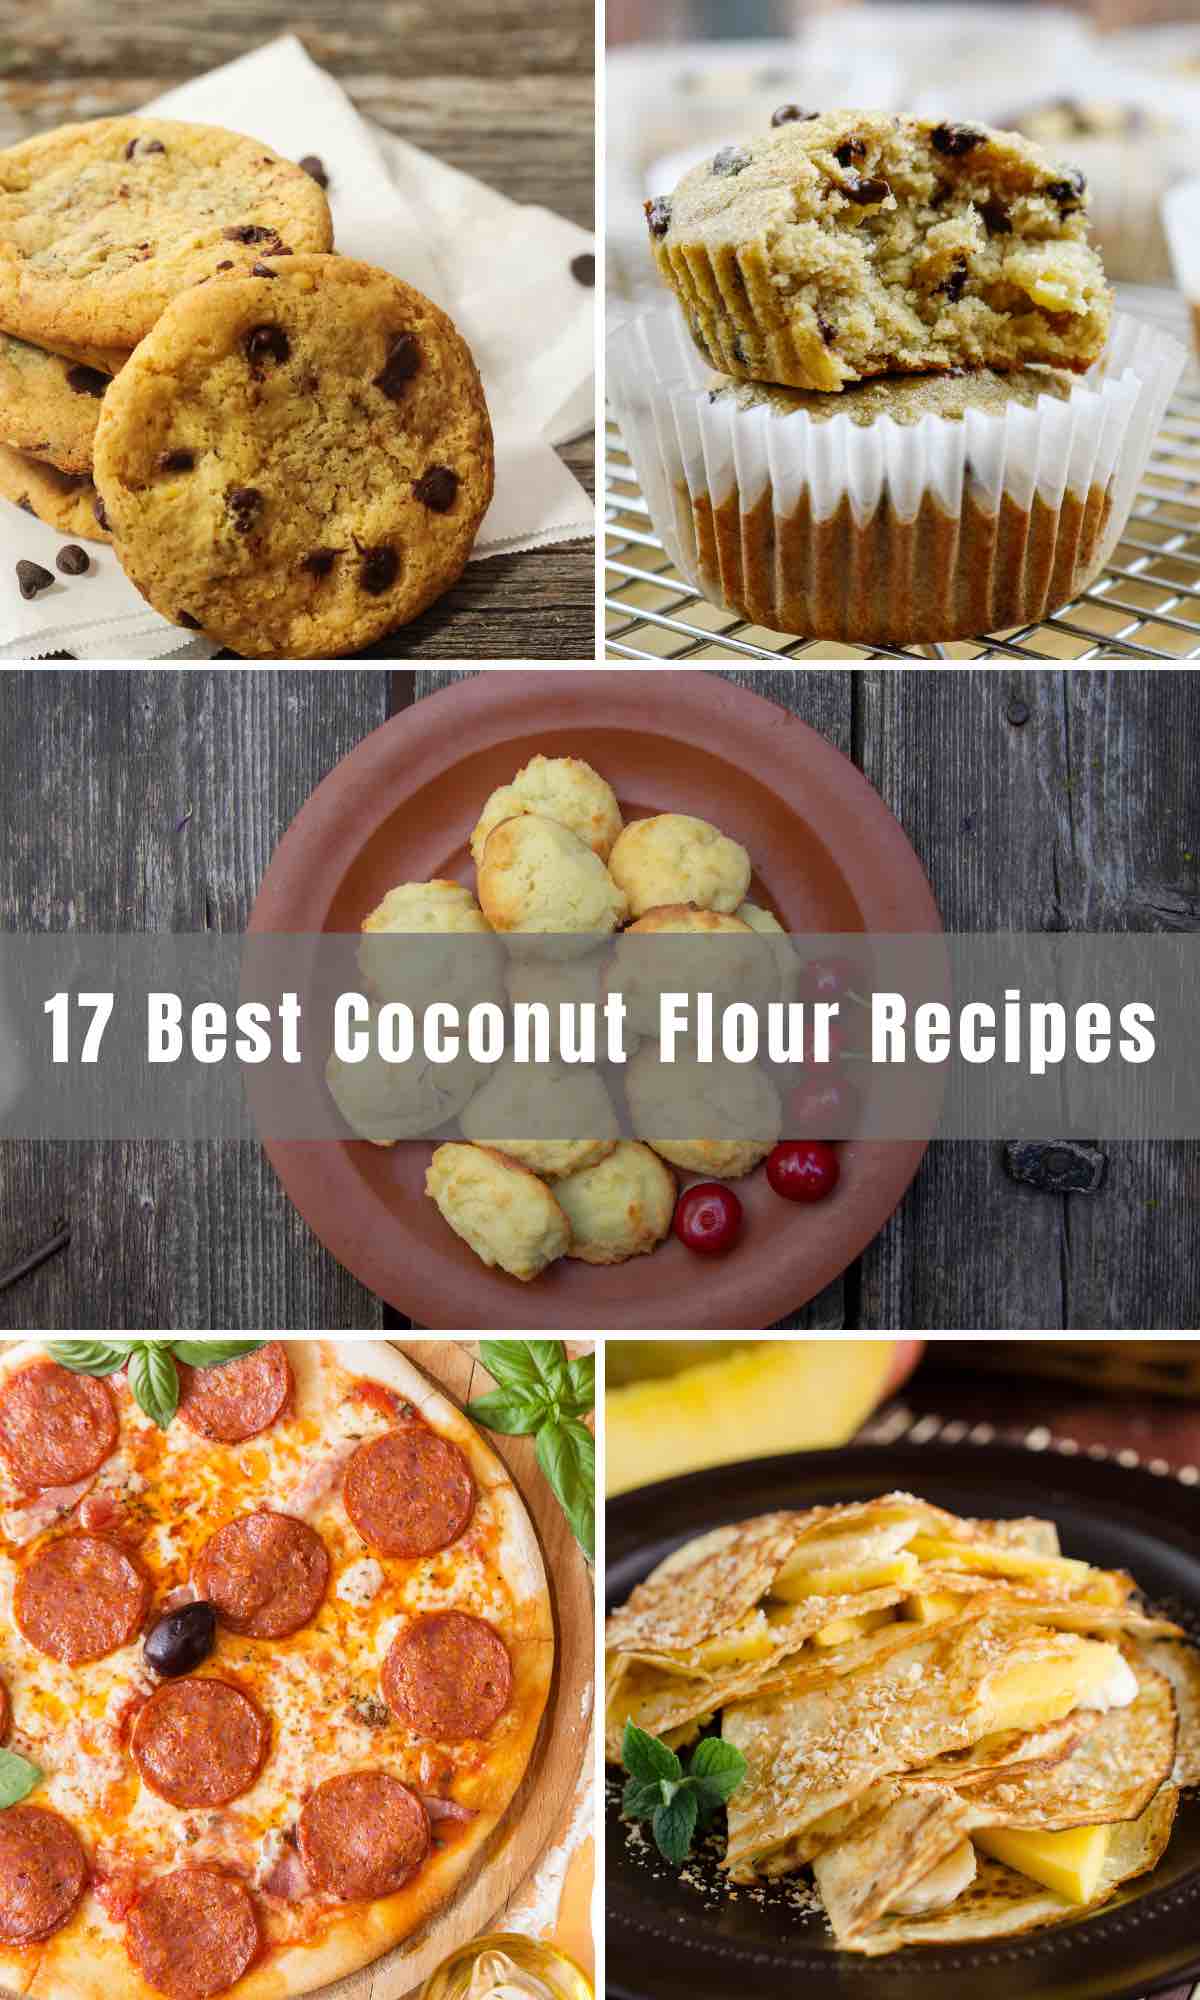 We've rounded up 17 Best Coconut Flour Recipes that are easy to make at home. Many of them are keto, sugar-free, dairy-free, and paleo-friendly. From treats to sweets and so much more, you’ll find something for everyone. Enjoy!